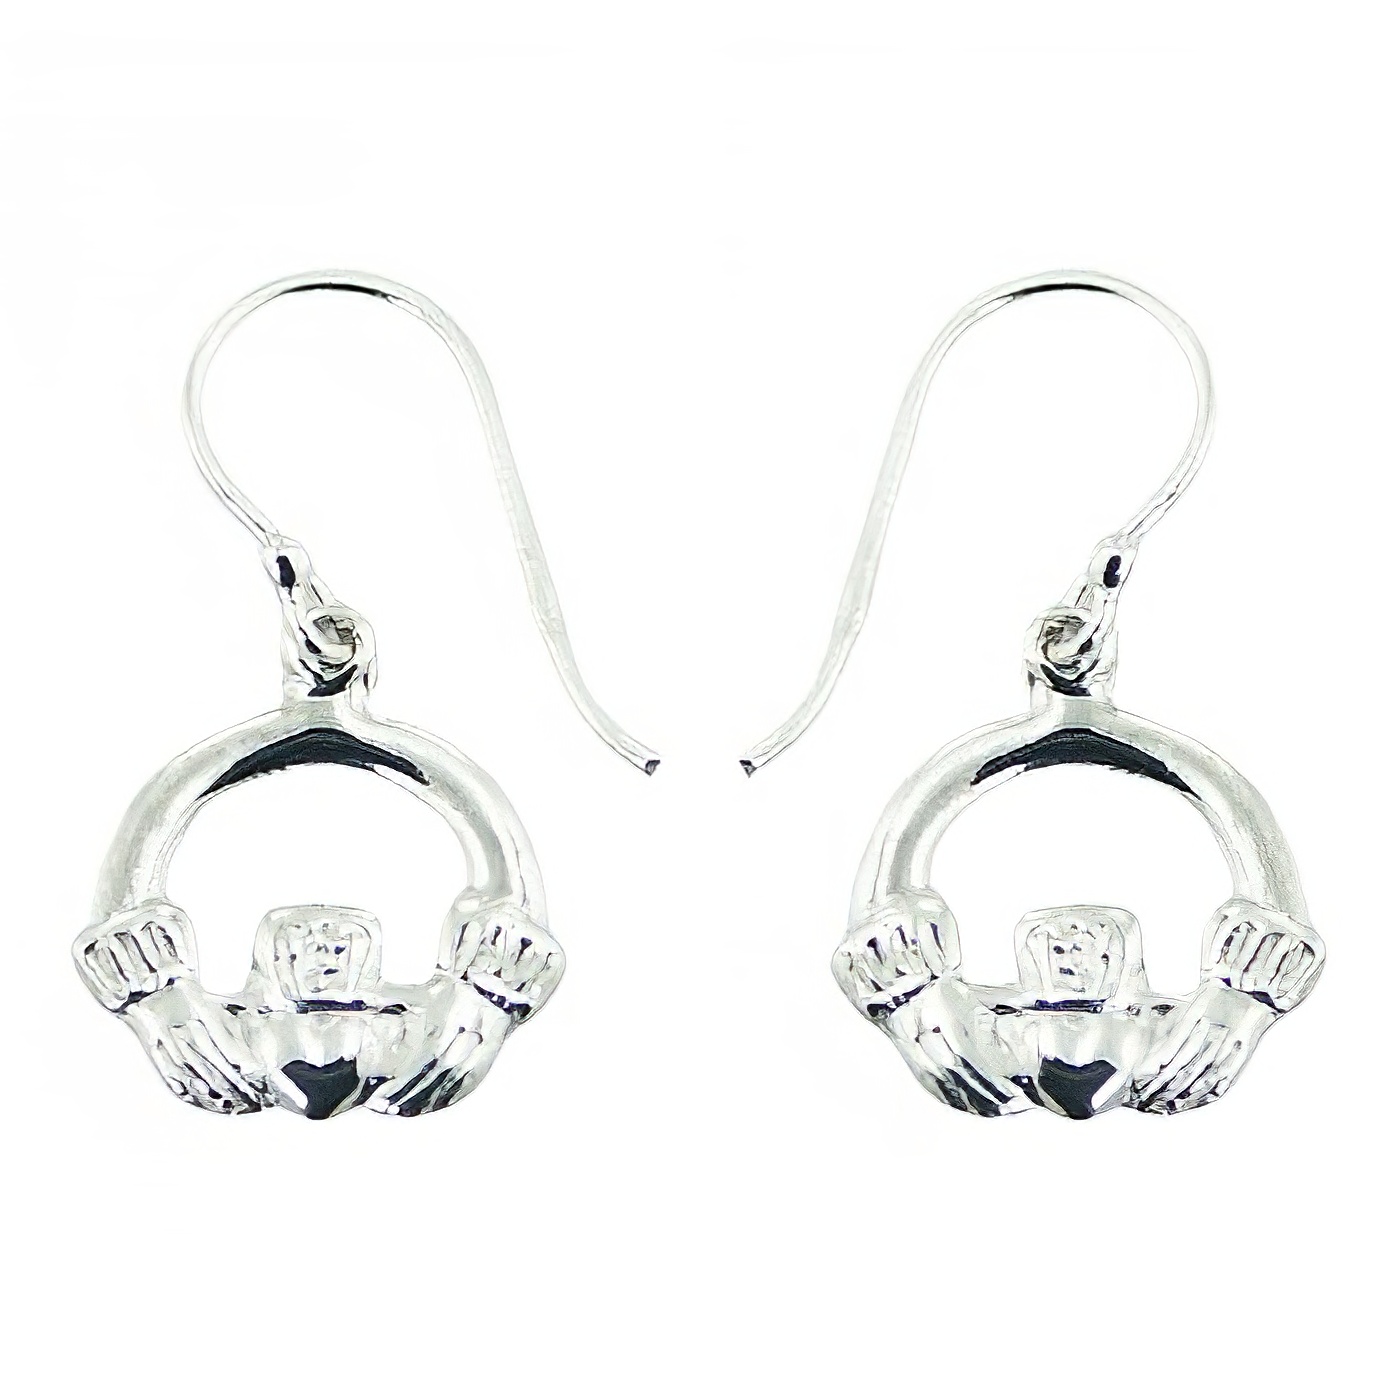 Casted Polished Sterling Silver Claddagh Dangle Earrings by BeYindi 